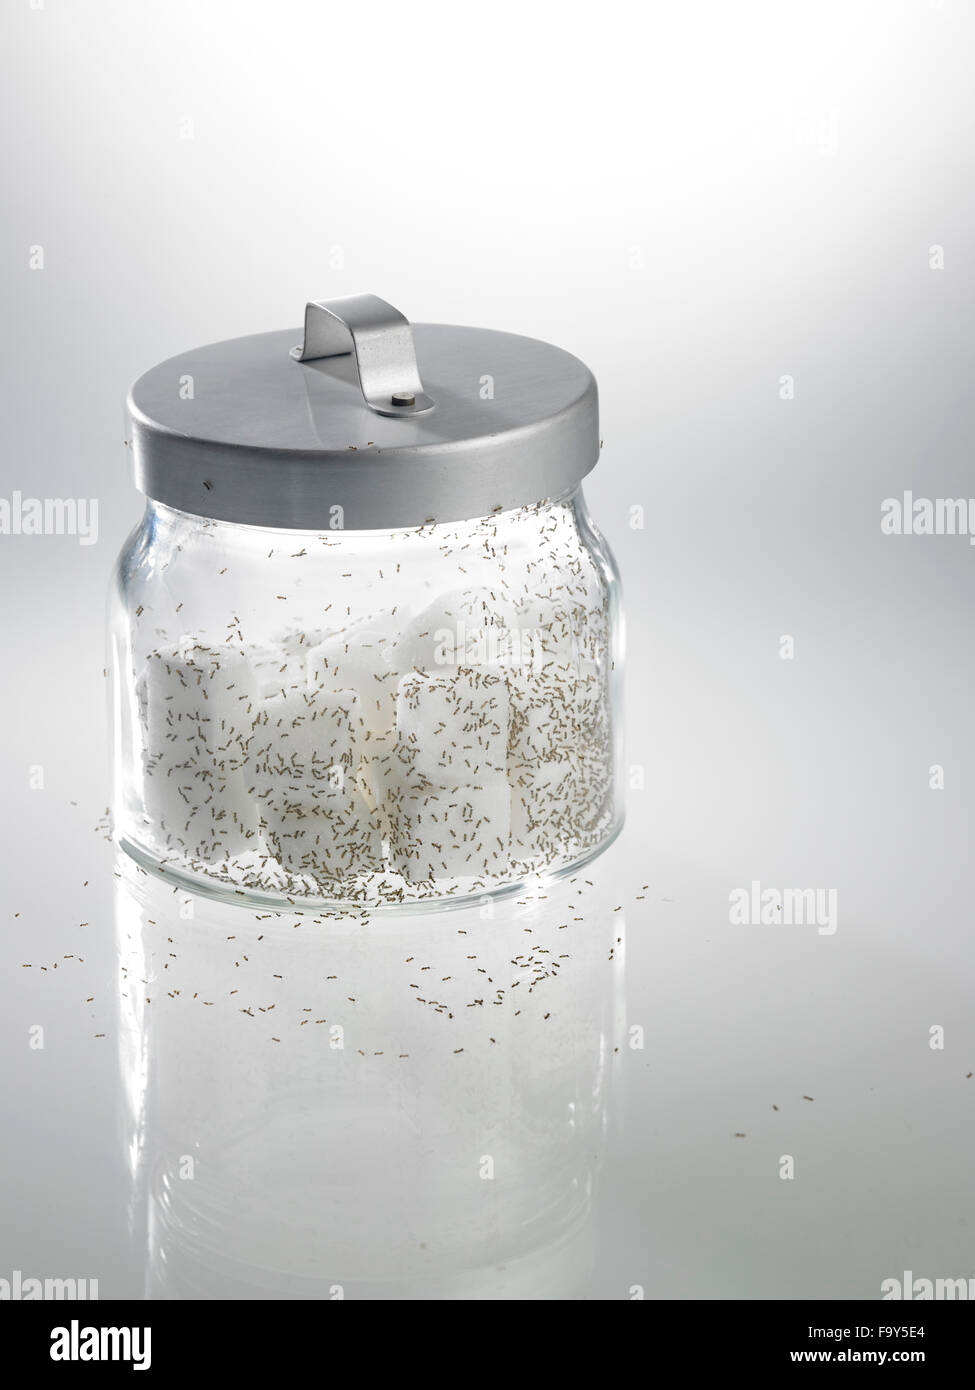 https://c8.alamy.com/comp/F9Y5E4/cube-sugar-surrounded-by-ants-F9Y5E4.jpg